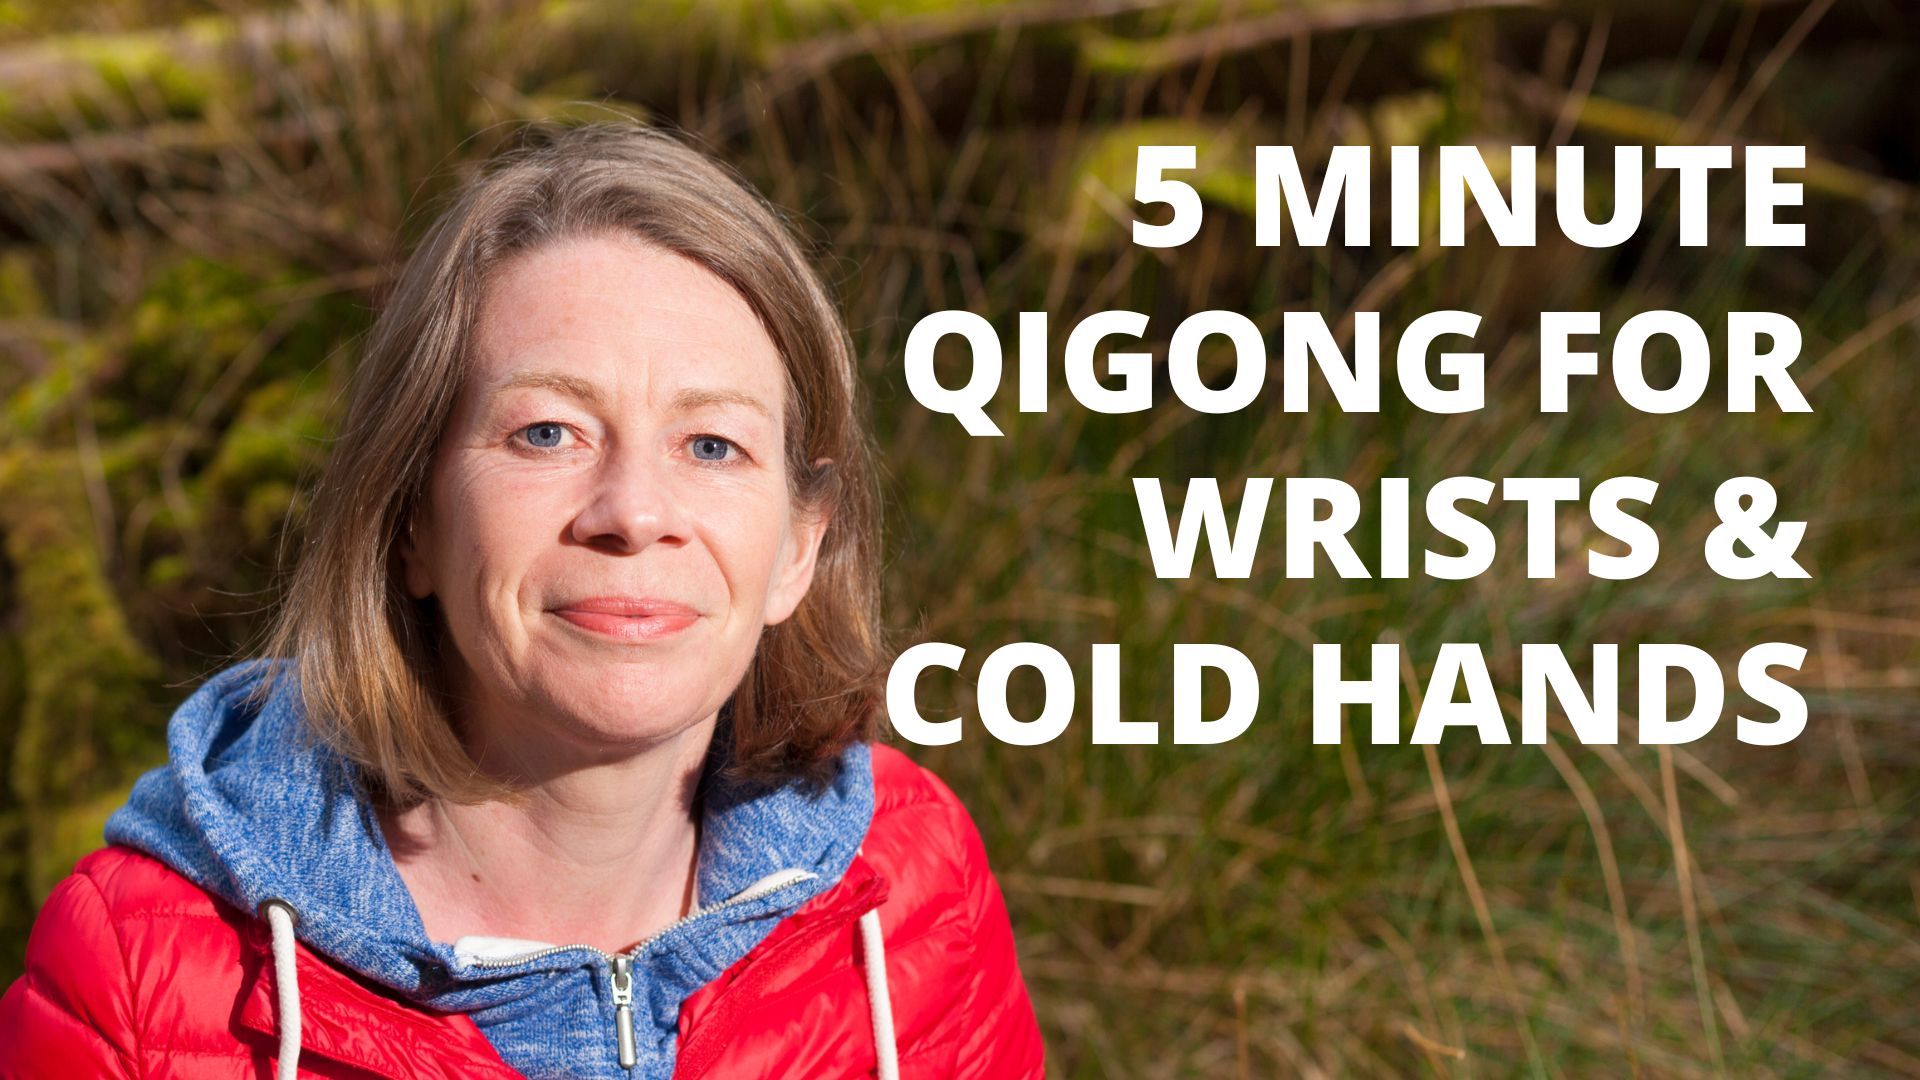 5 Minute Qigong for Wrists and Cold Hands